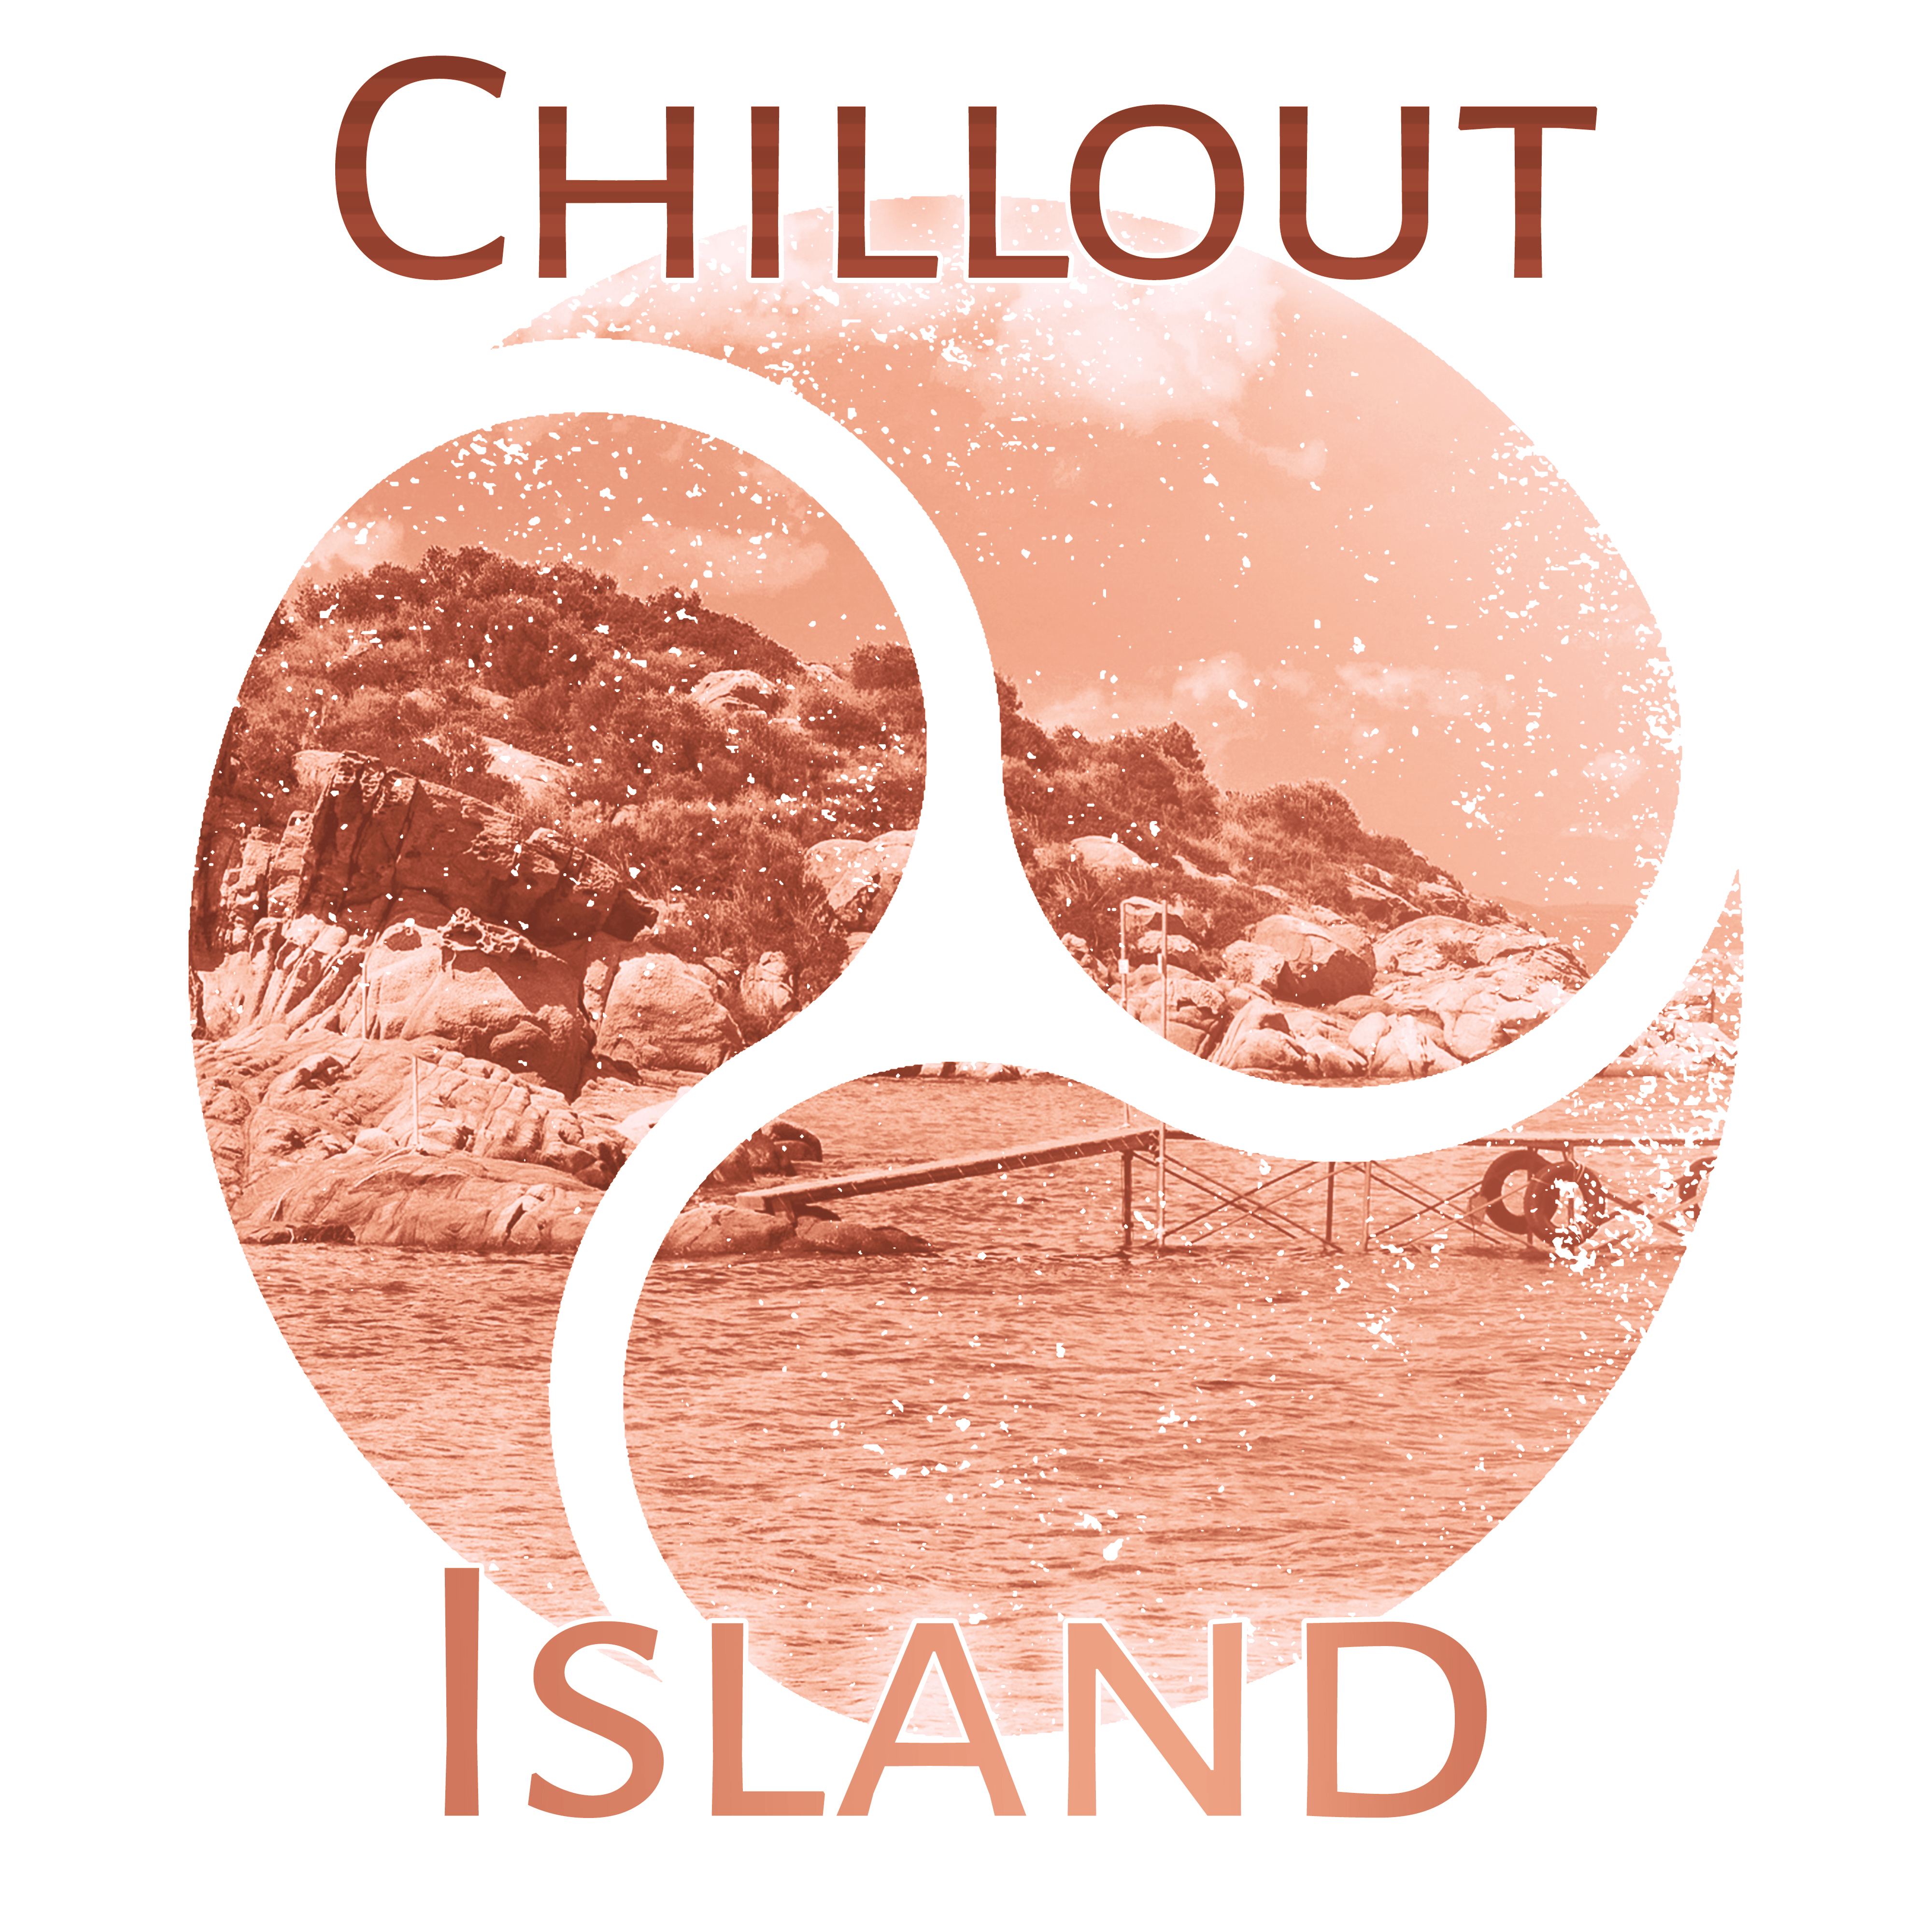 Chillout Island  Best Relaxation Music, Calming Waves, Tropical Sounds, Beach Vibes